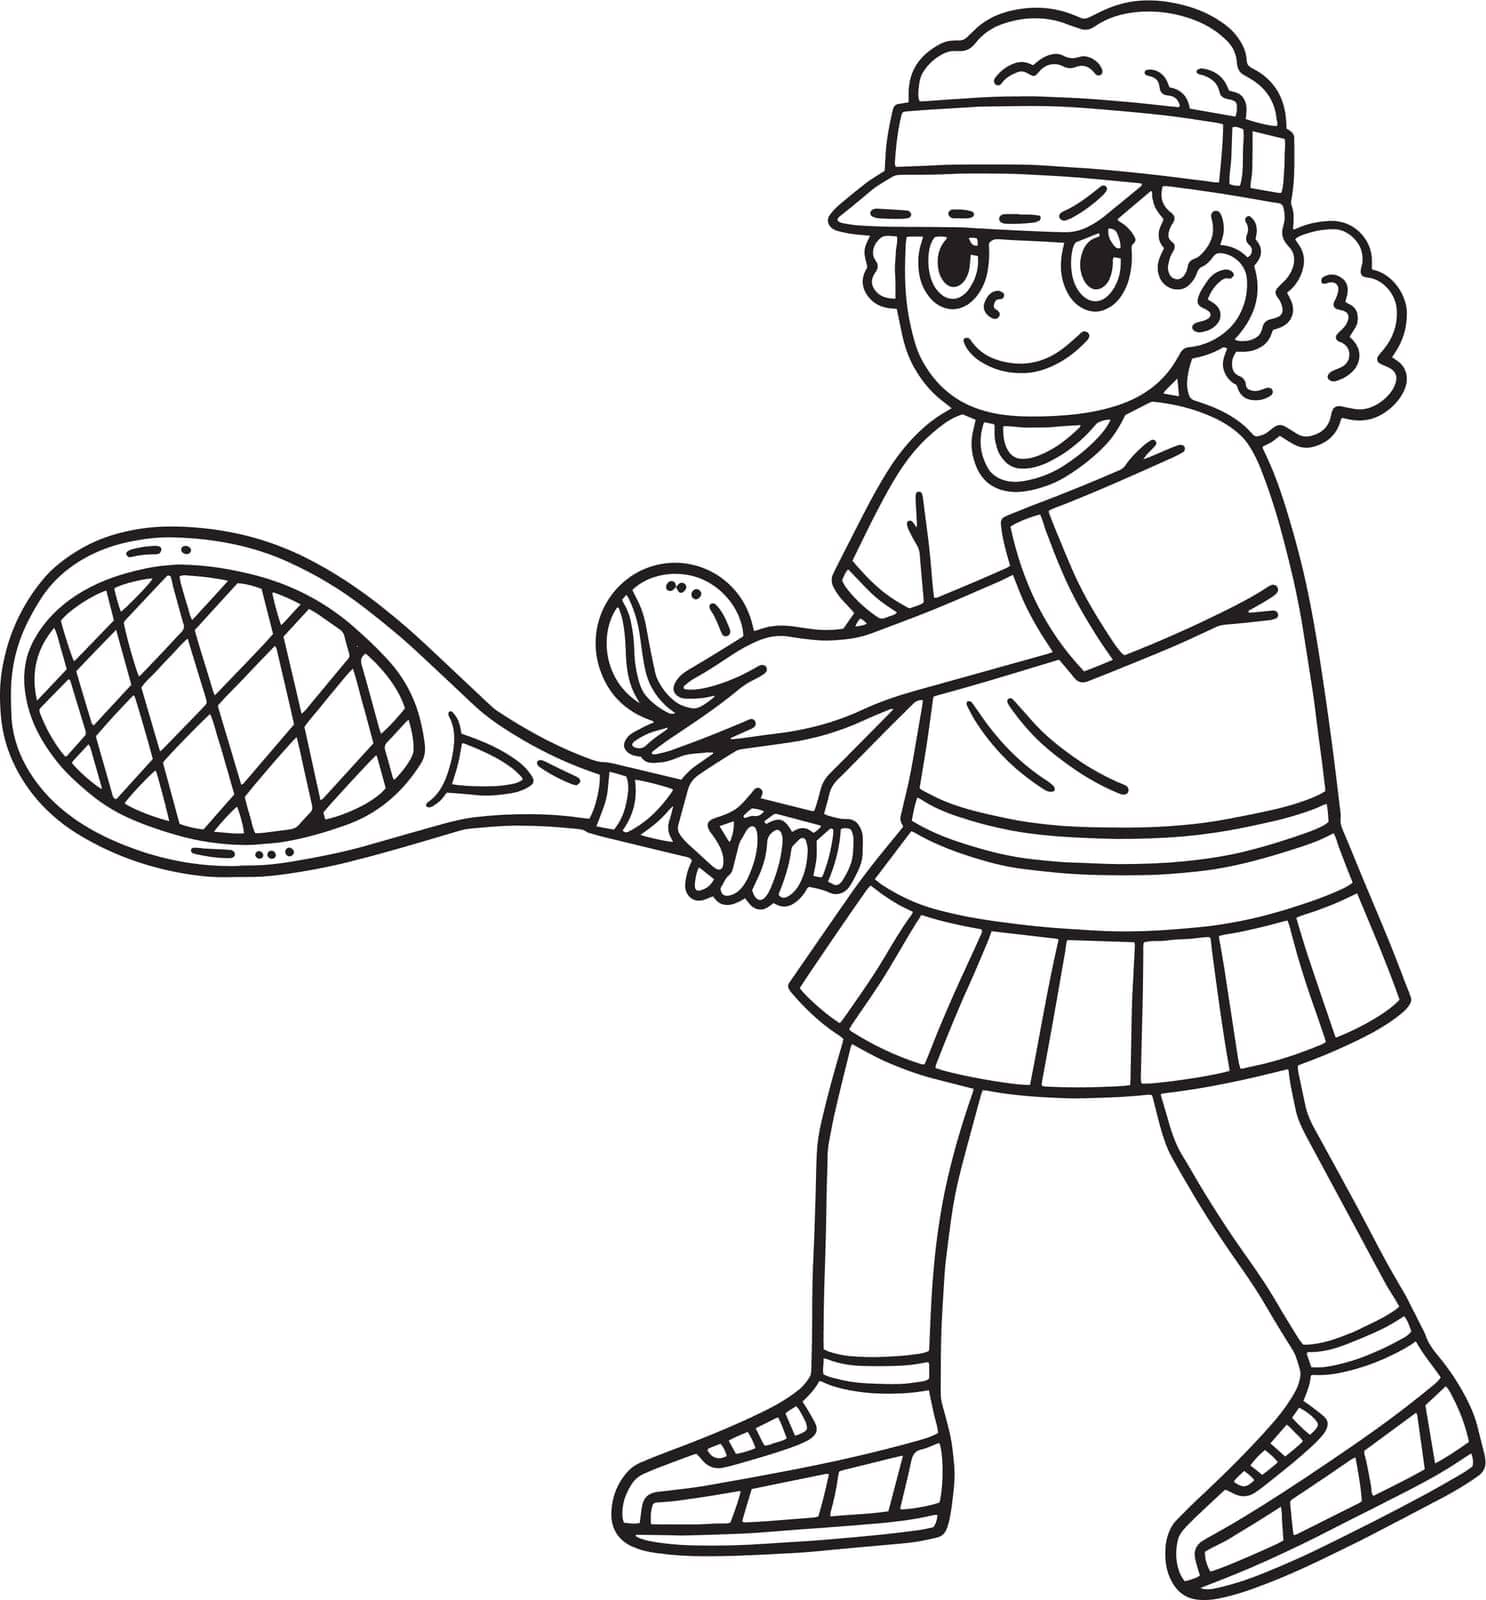 A cute and funny coloring page of a Tennis Female Player Ready to Serve. Provides hours of coloring fun for children. To color, this page is very easy. Suitable for little kids and toddlers.